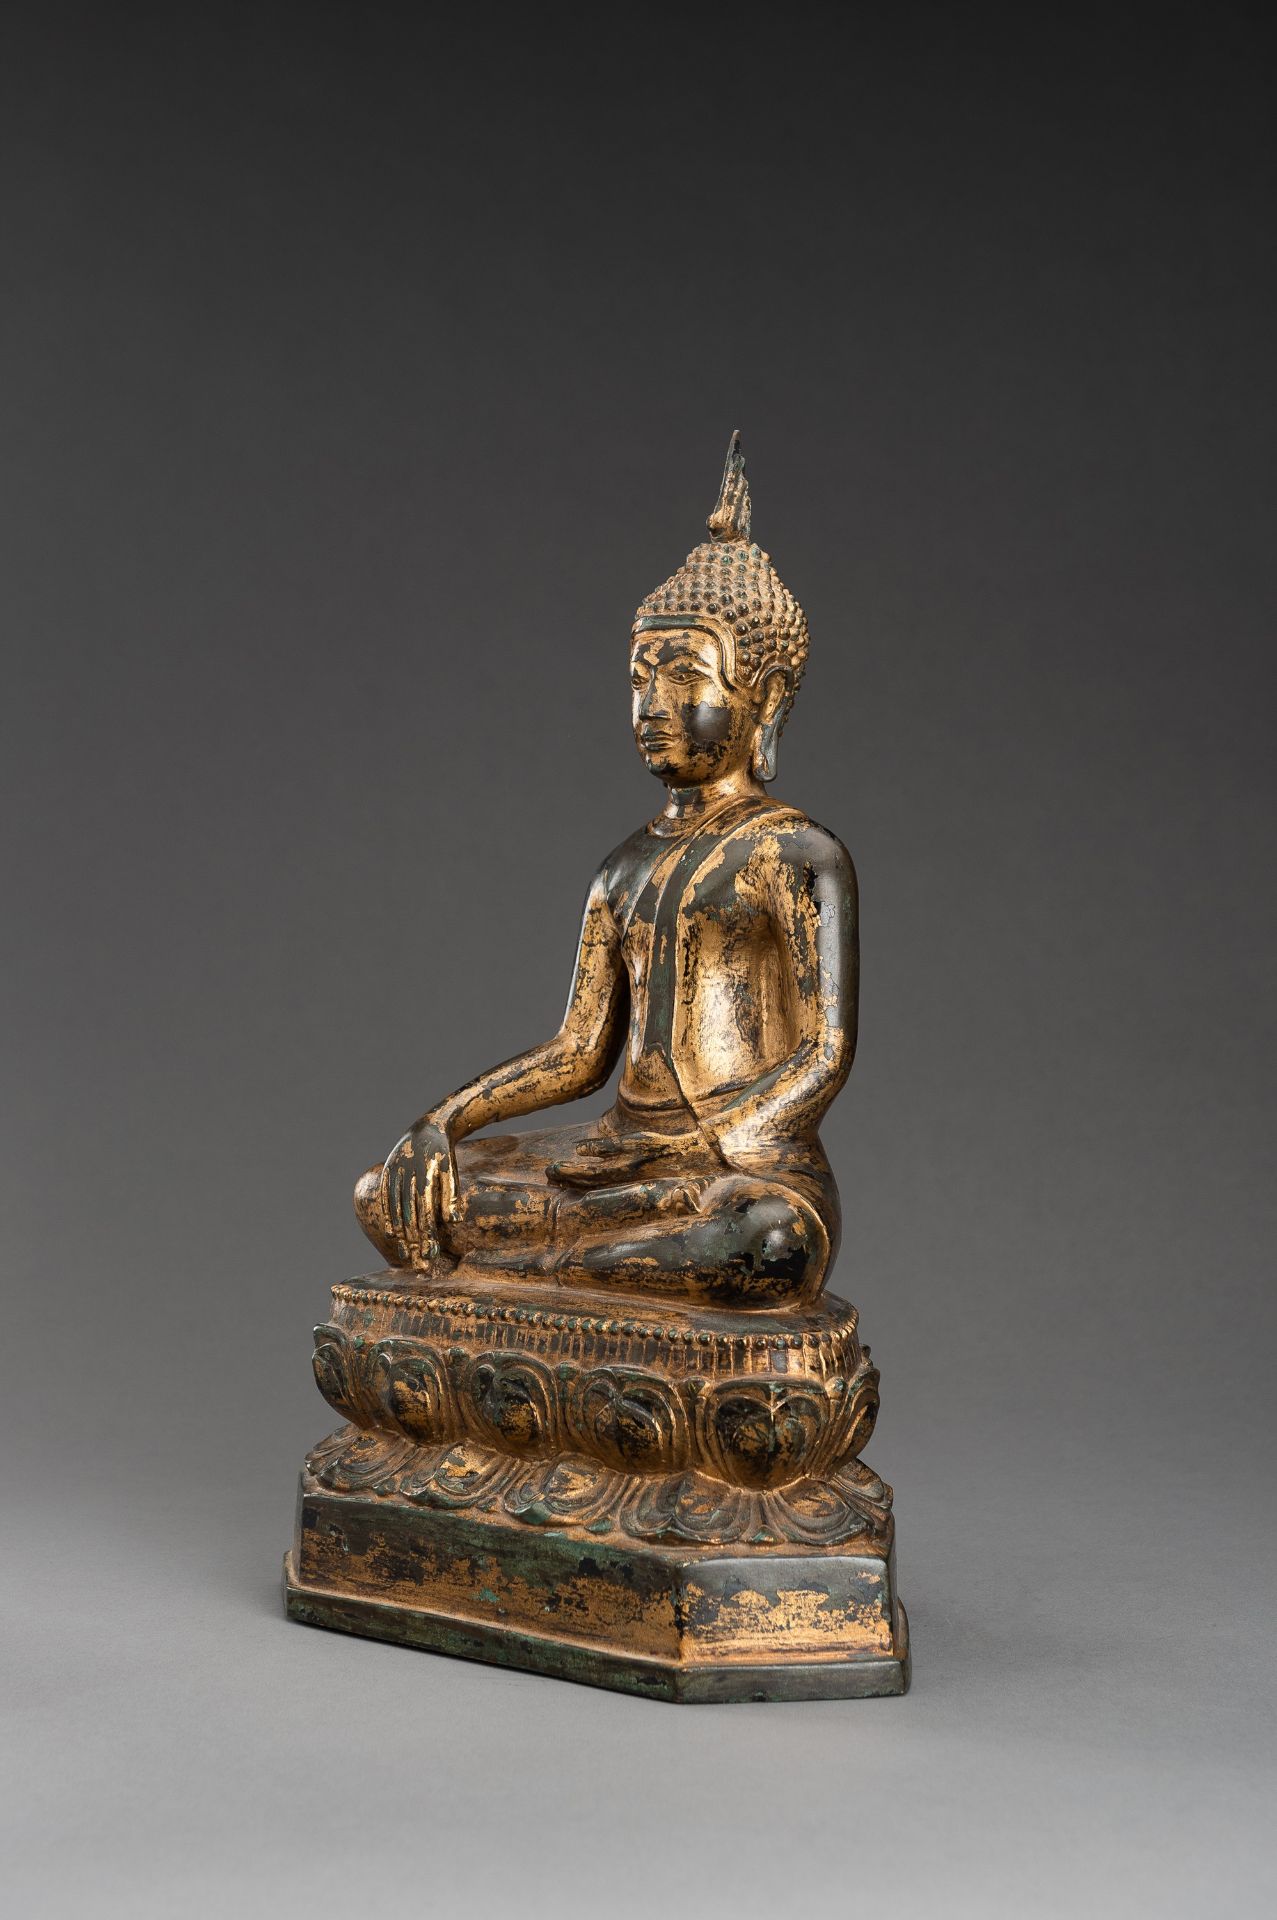 A LARGE GOLD LACQUERED BRONZE FIGURE OF BUDDHA - Image 3 of 10